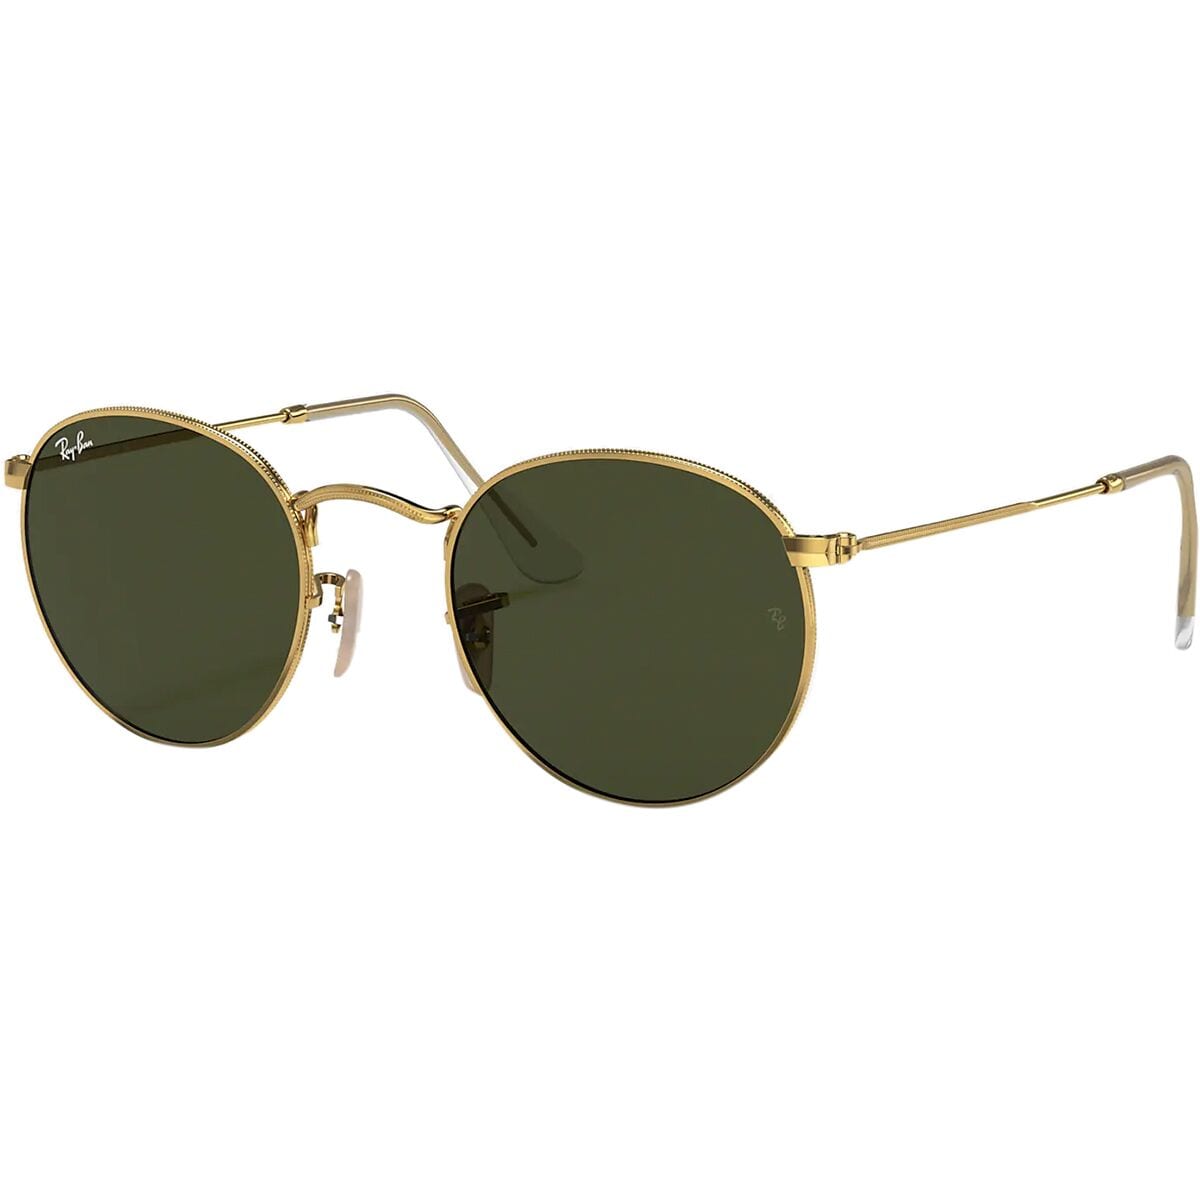 Ray-Ban Round Metal Sunglasses - Accessories